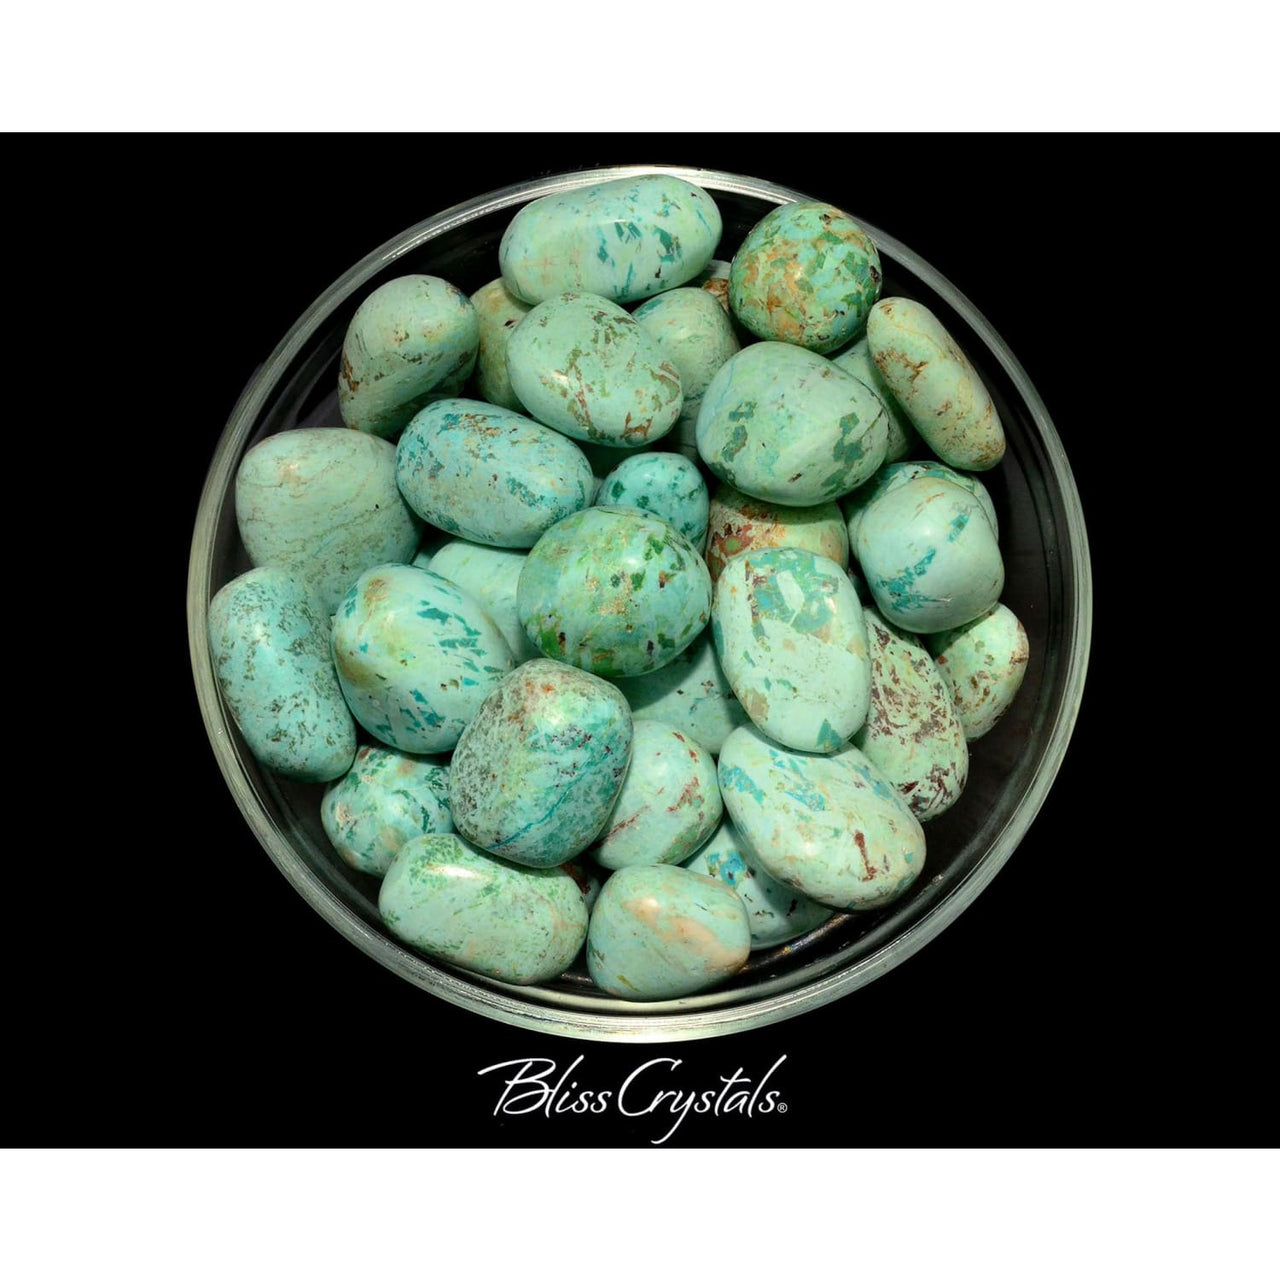 1 Peruvian Turquoise + Chrysocolla Inclusions Tumbled Stone 